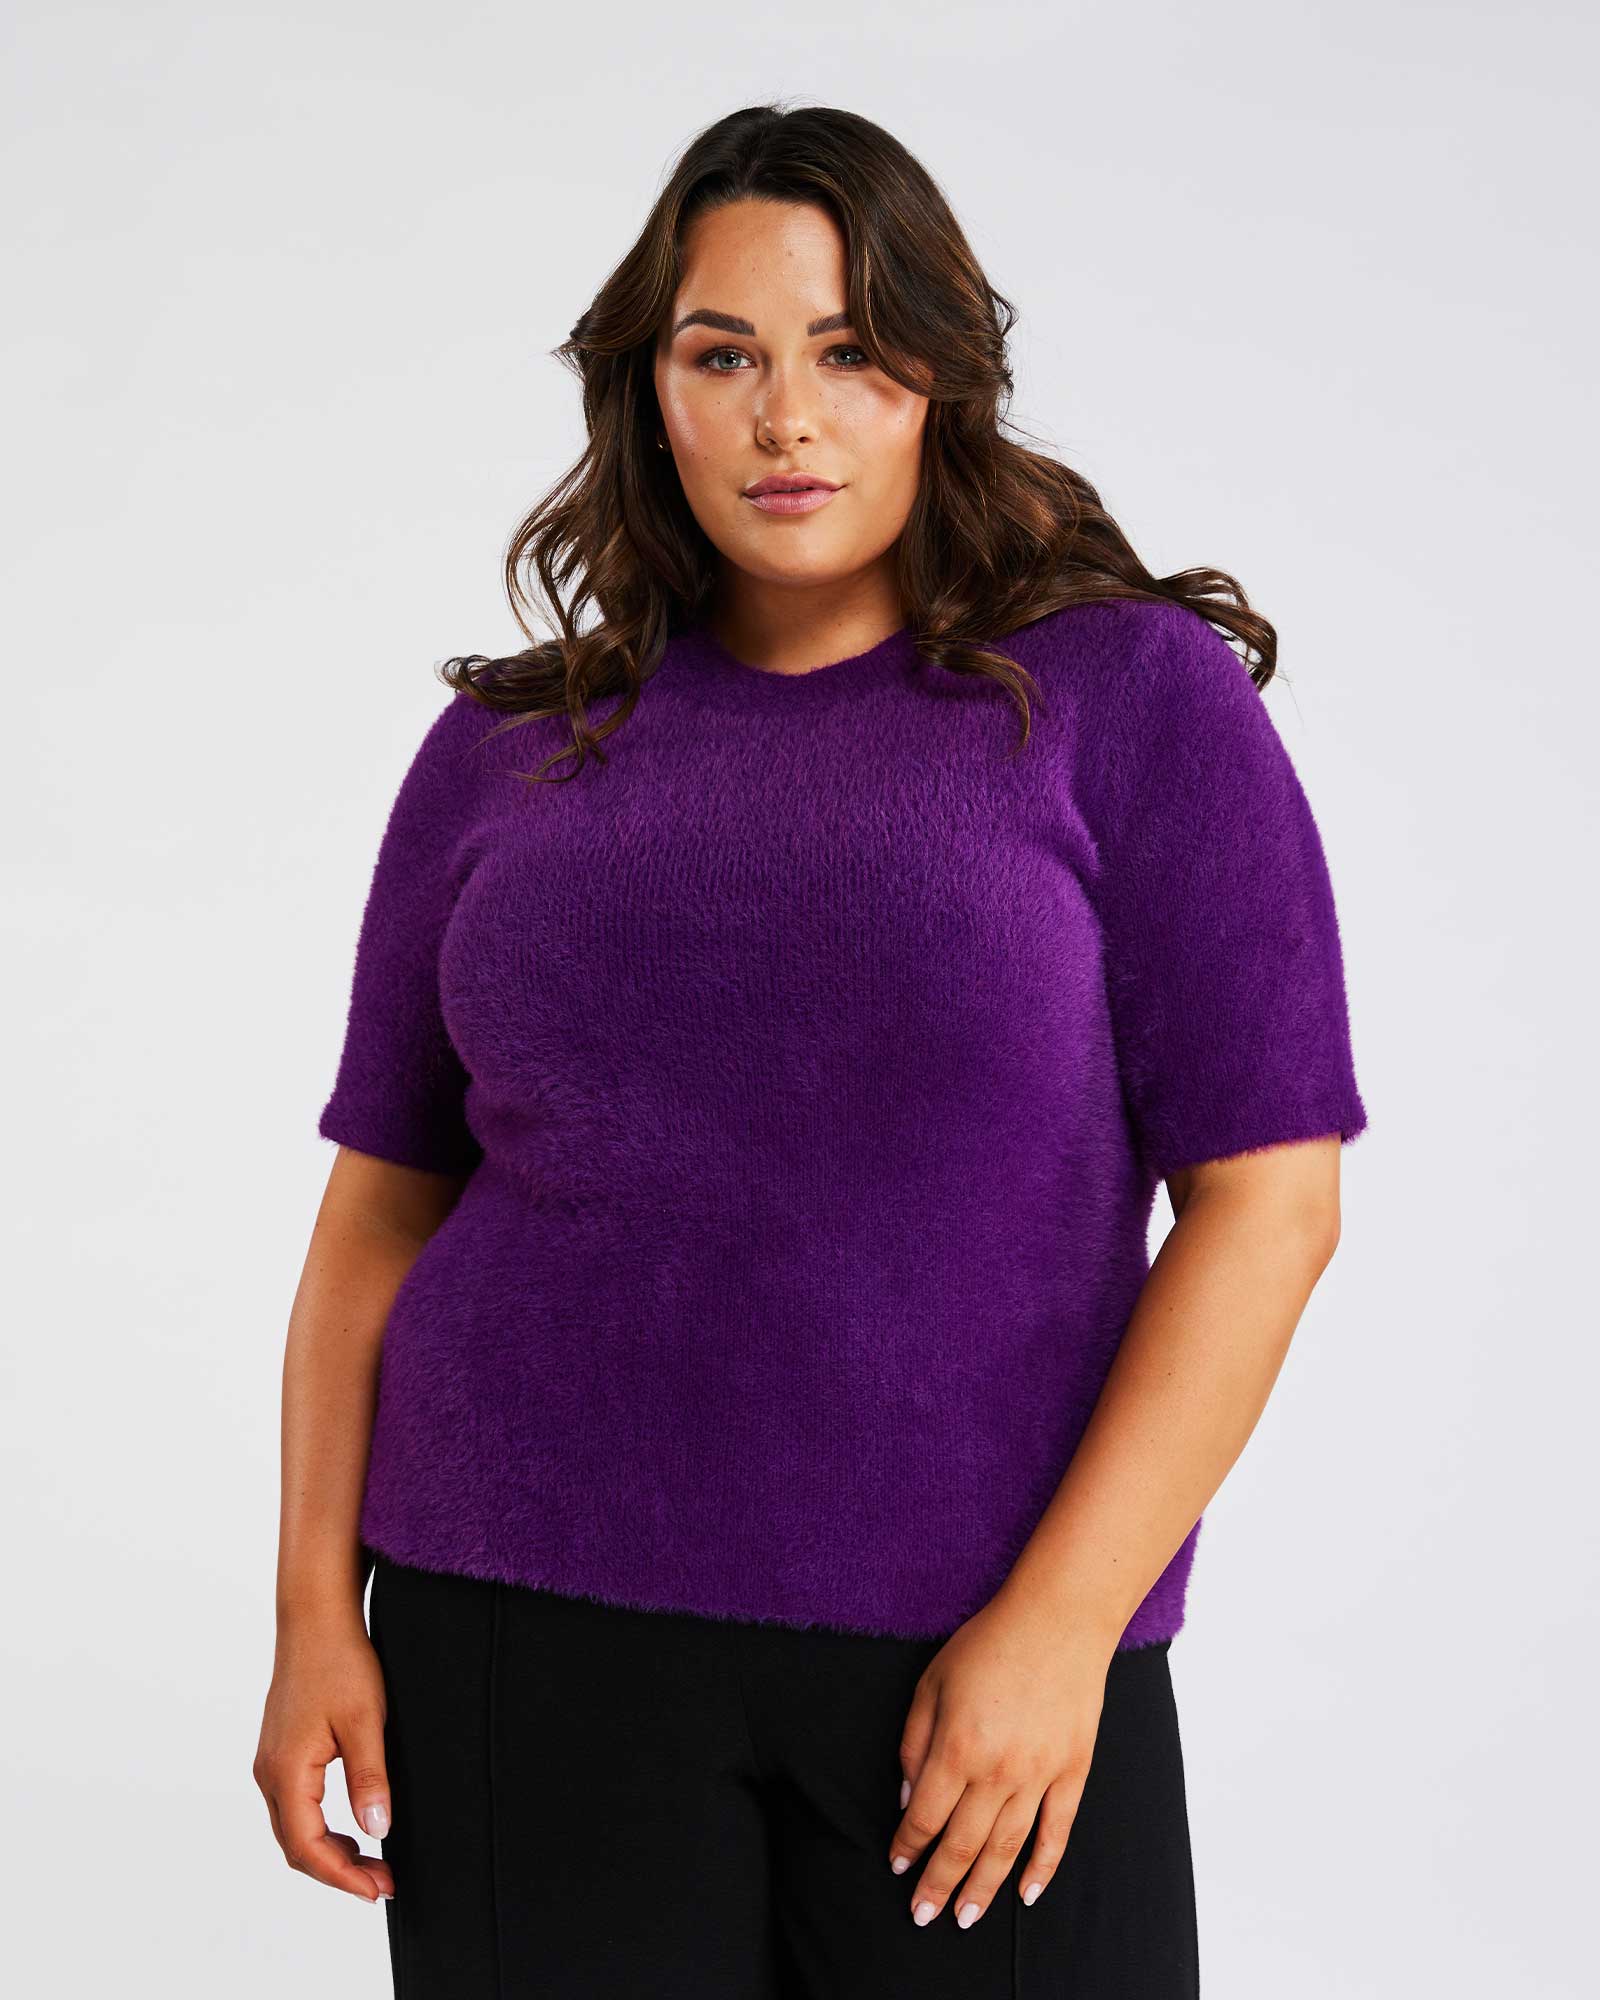 A woman wearing an Estelle Nora Fuzzy Purple Short-Sleeved Sweater and black pants.